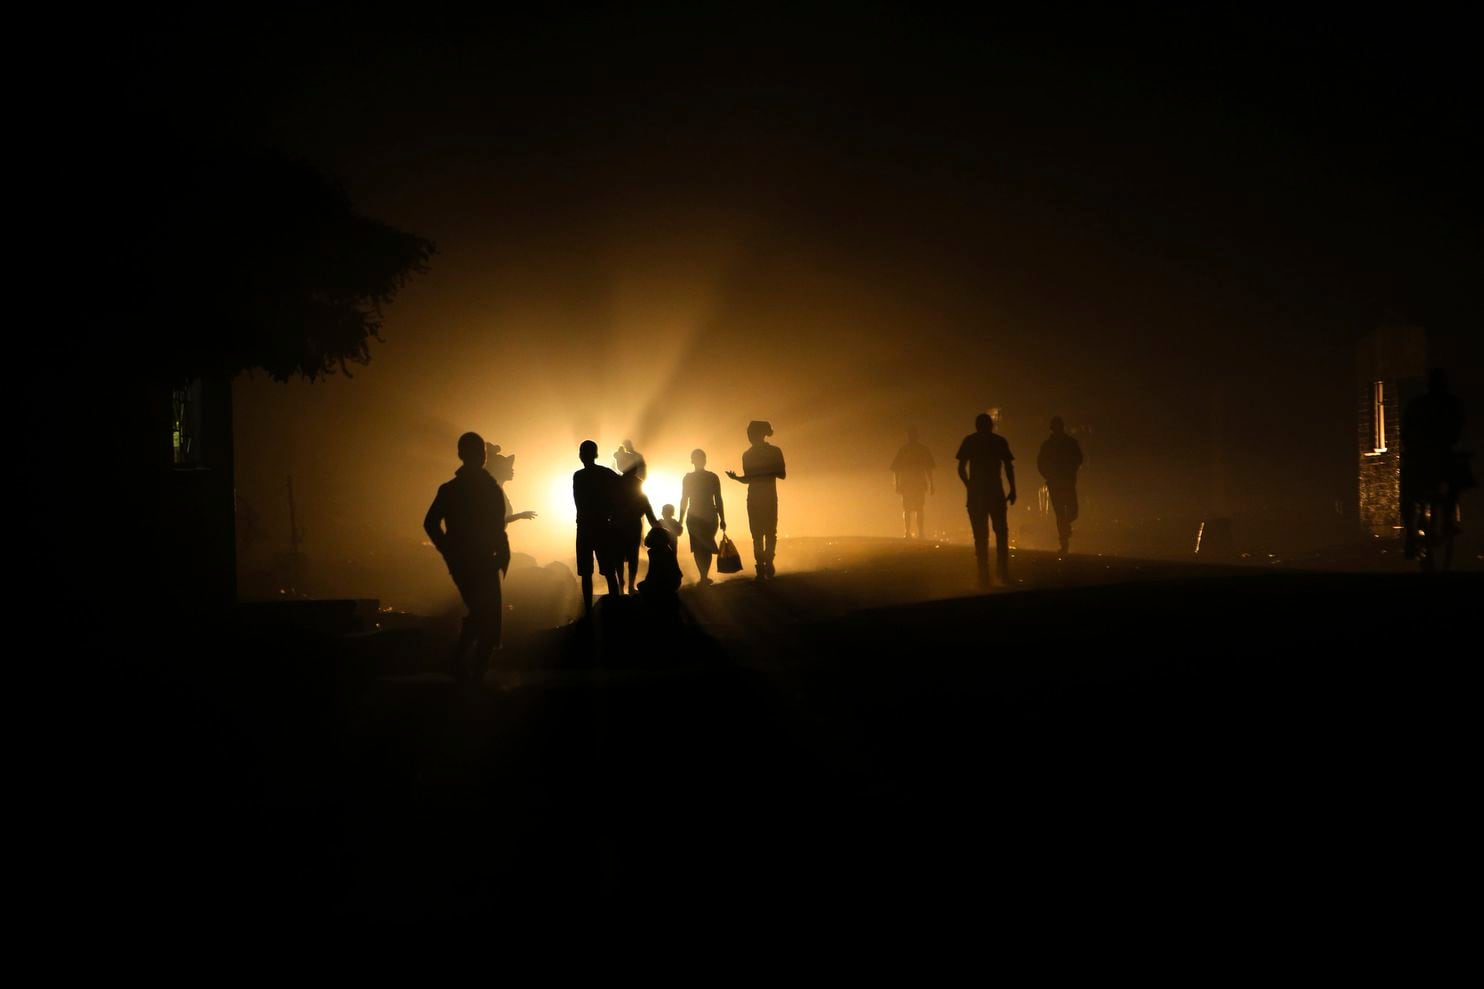 People walk home in the dark due to power shortages in Harare, on Monday, 30 September 2019. Zimbabwean President Emmerson Mnangagwa presented a State of the Nation address on 1 October 2019, at a time the southern African nation is reeling from its worst economic crisis in more than a decade. Zimbabweans are enduring shortages of everything from medicines, fuel, cash and water, bringing a weariness and disgust that has often flared into streets protests. Opposition lawmakers walk out of president’s speech. Photo: Tsvangirayi Mukwazhi / Associated Press